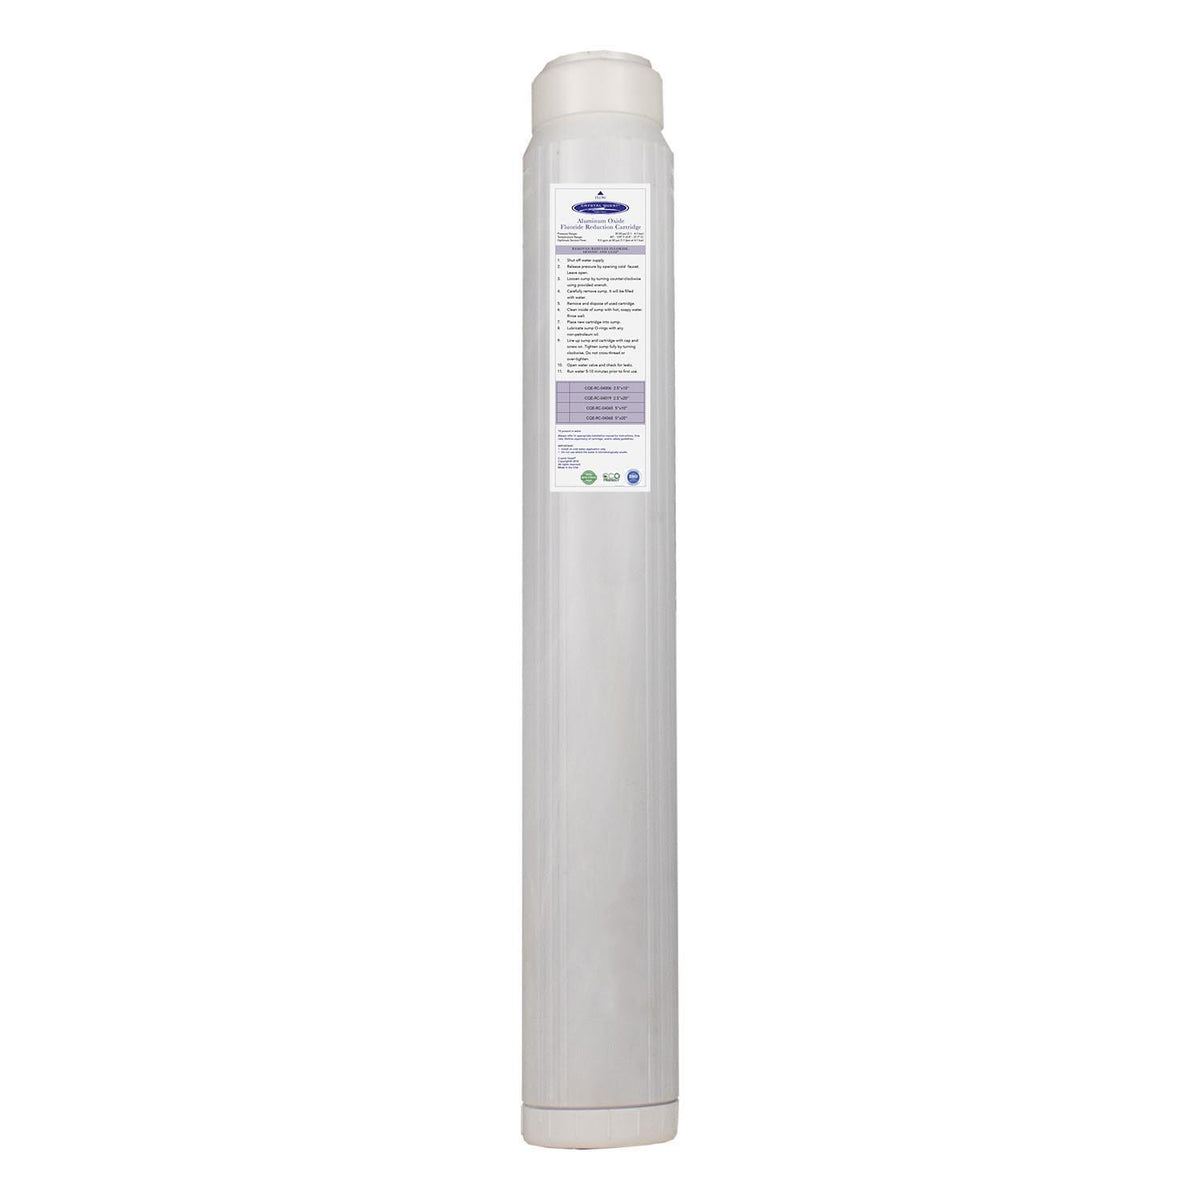 2-7/8" x 20" Fluoride Removal Filter Cartridge - Water Filter Cartridges - Crystal Quest